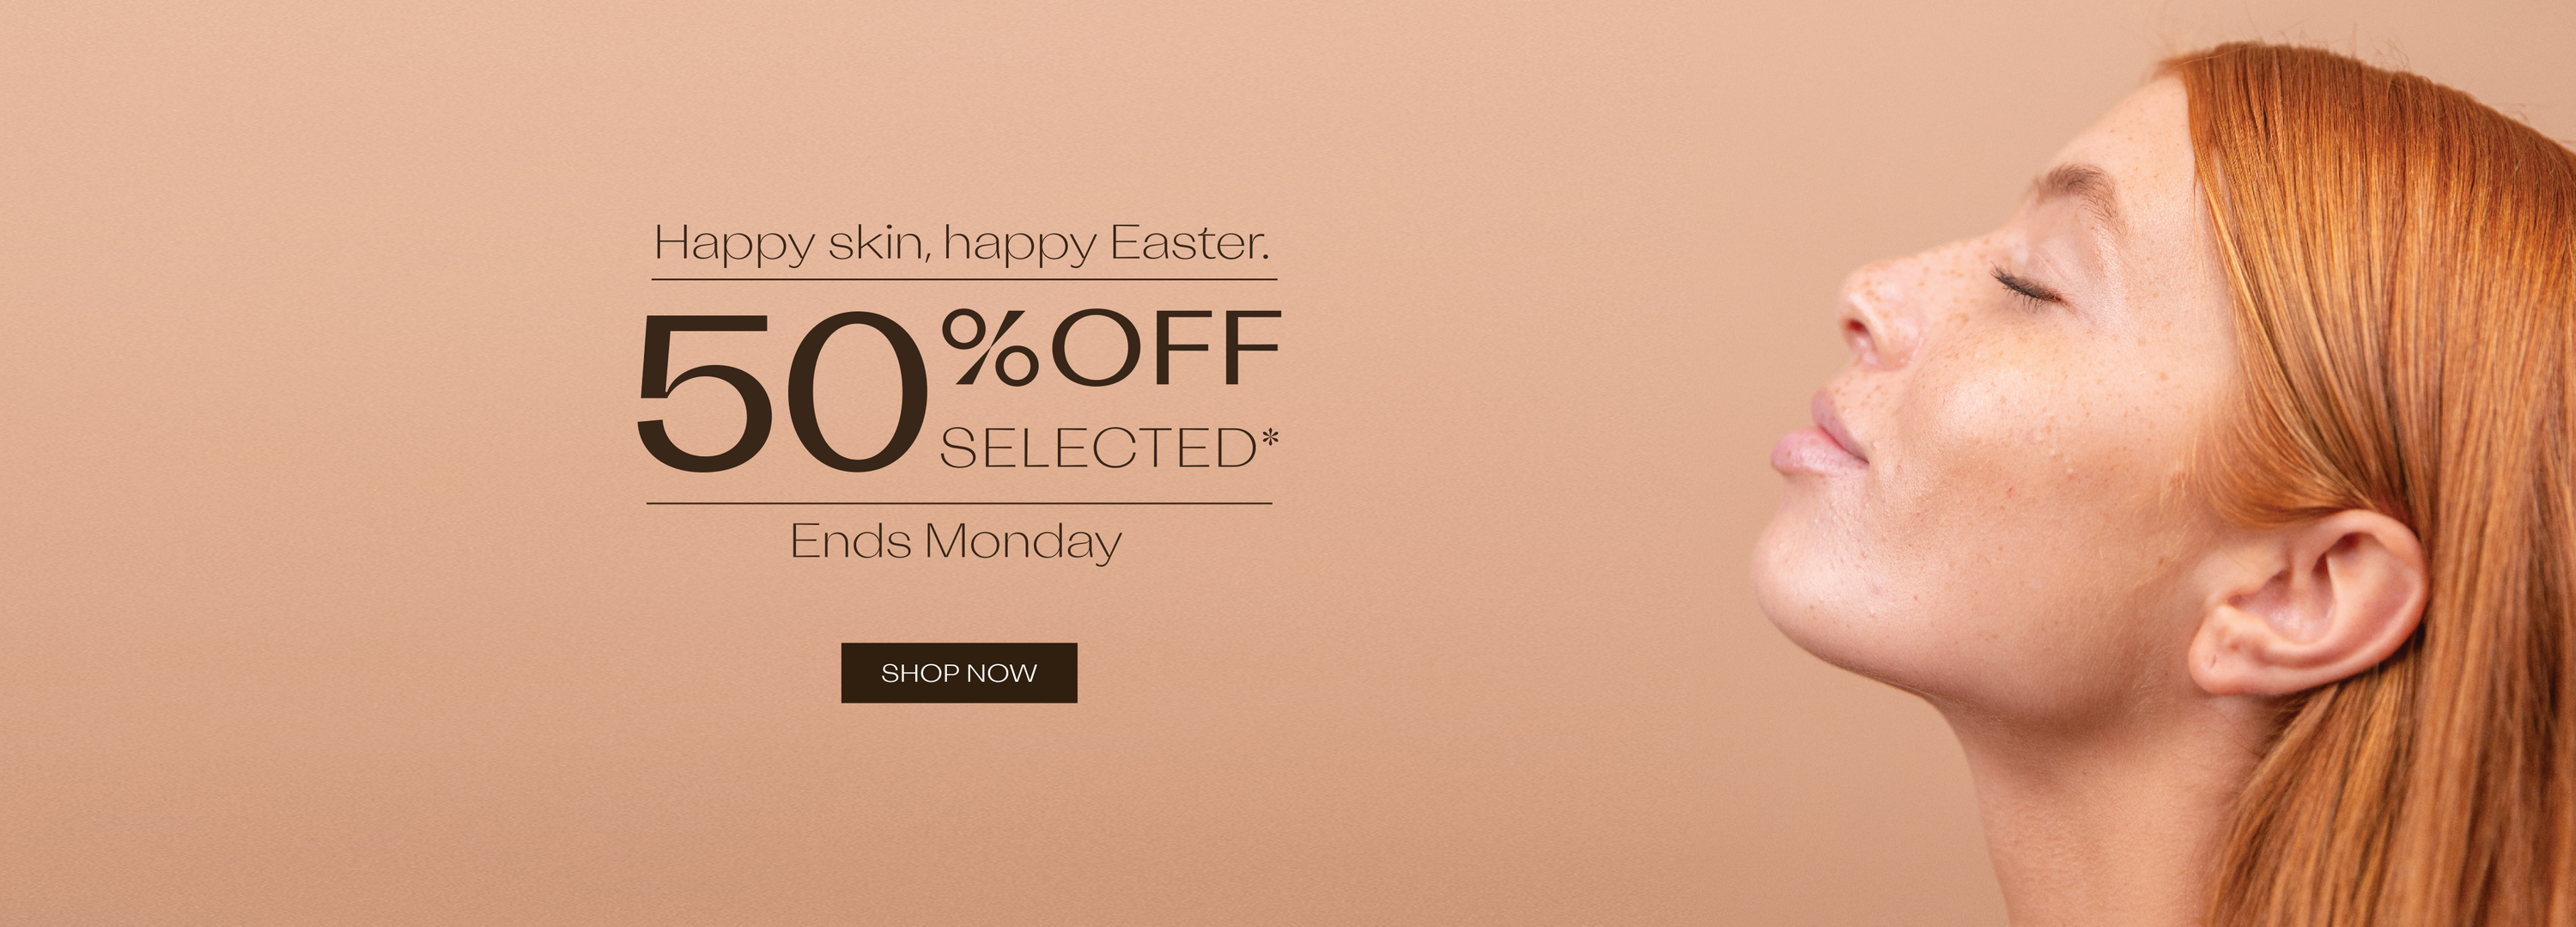 50% off selected